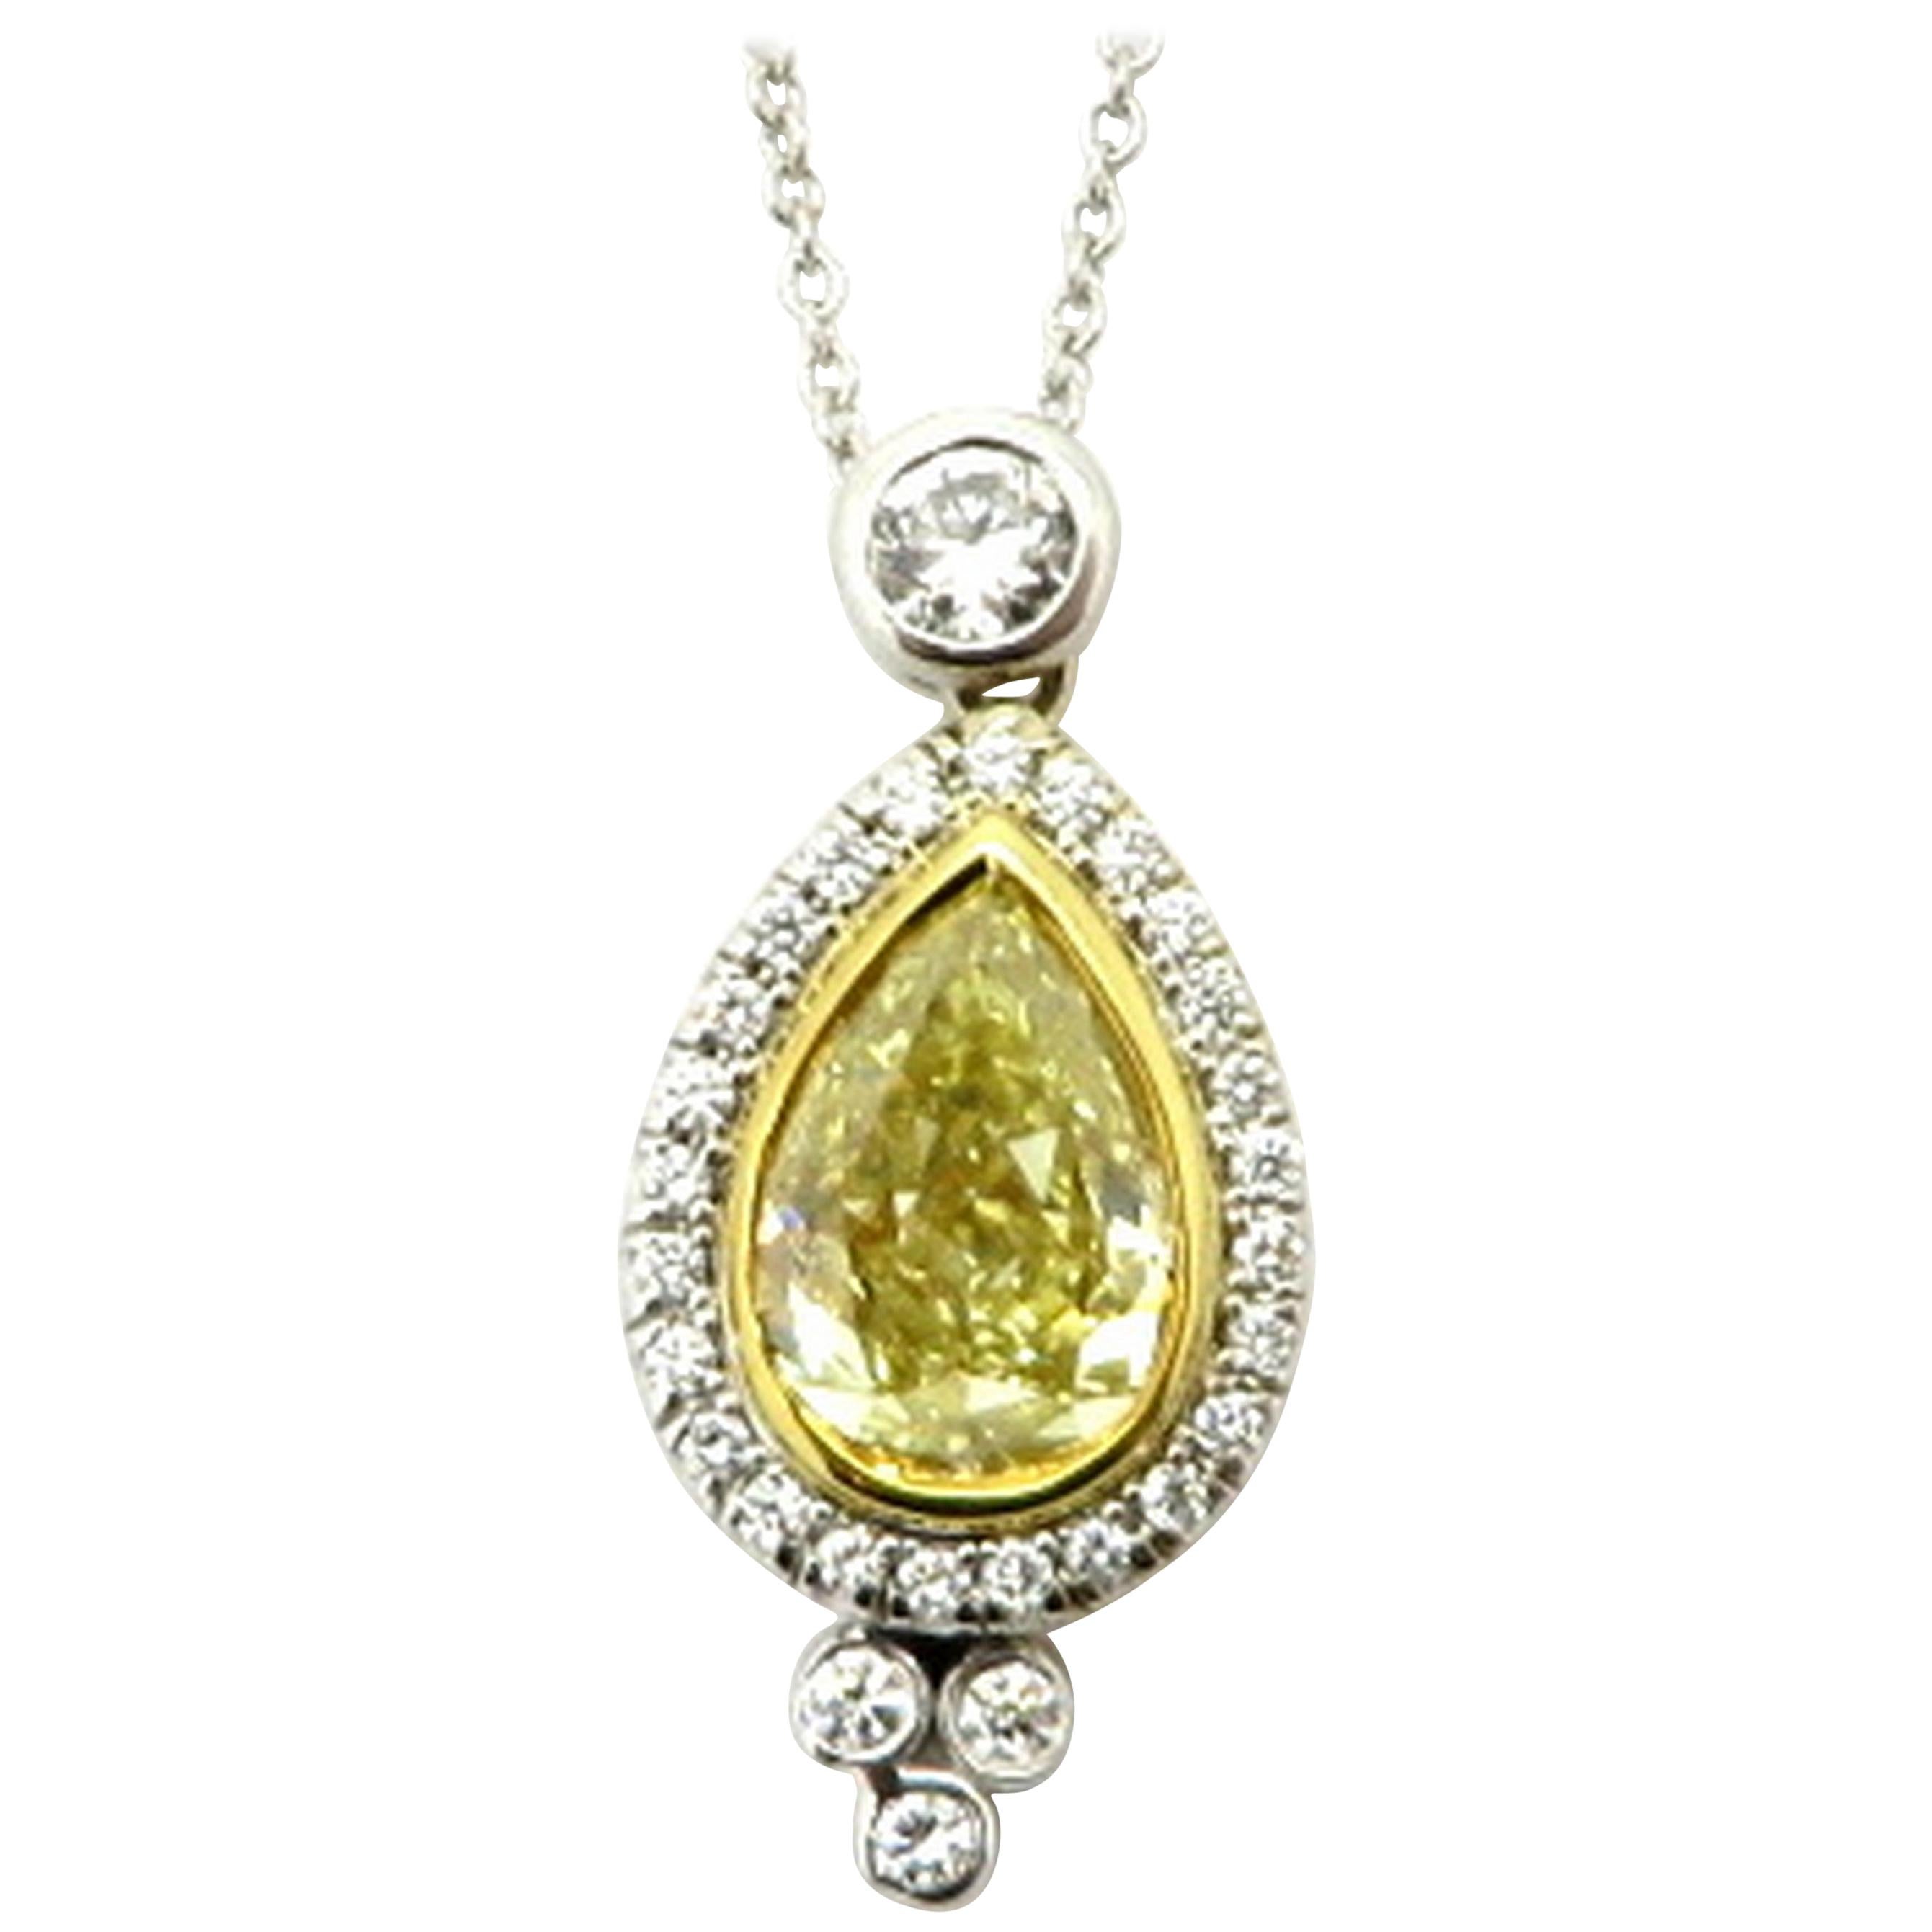 Estate GIA Certified Fancy Yellow Pear Shaped Diamond Necklace